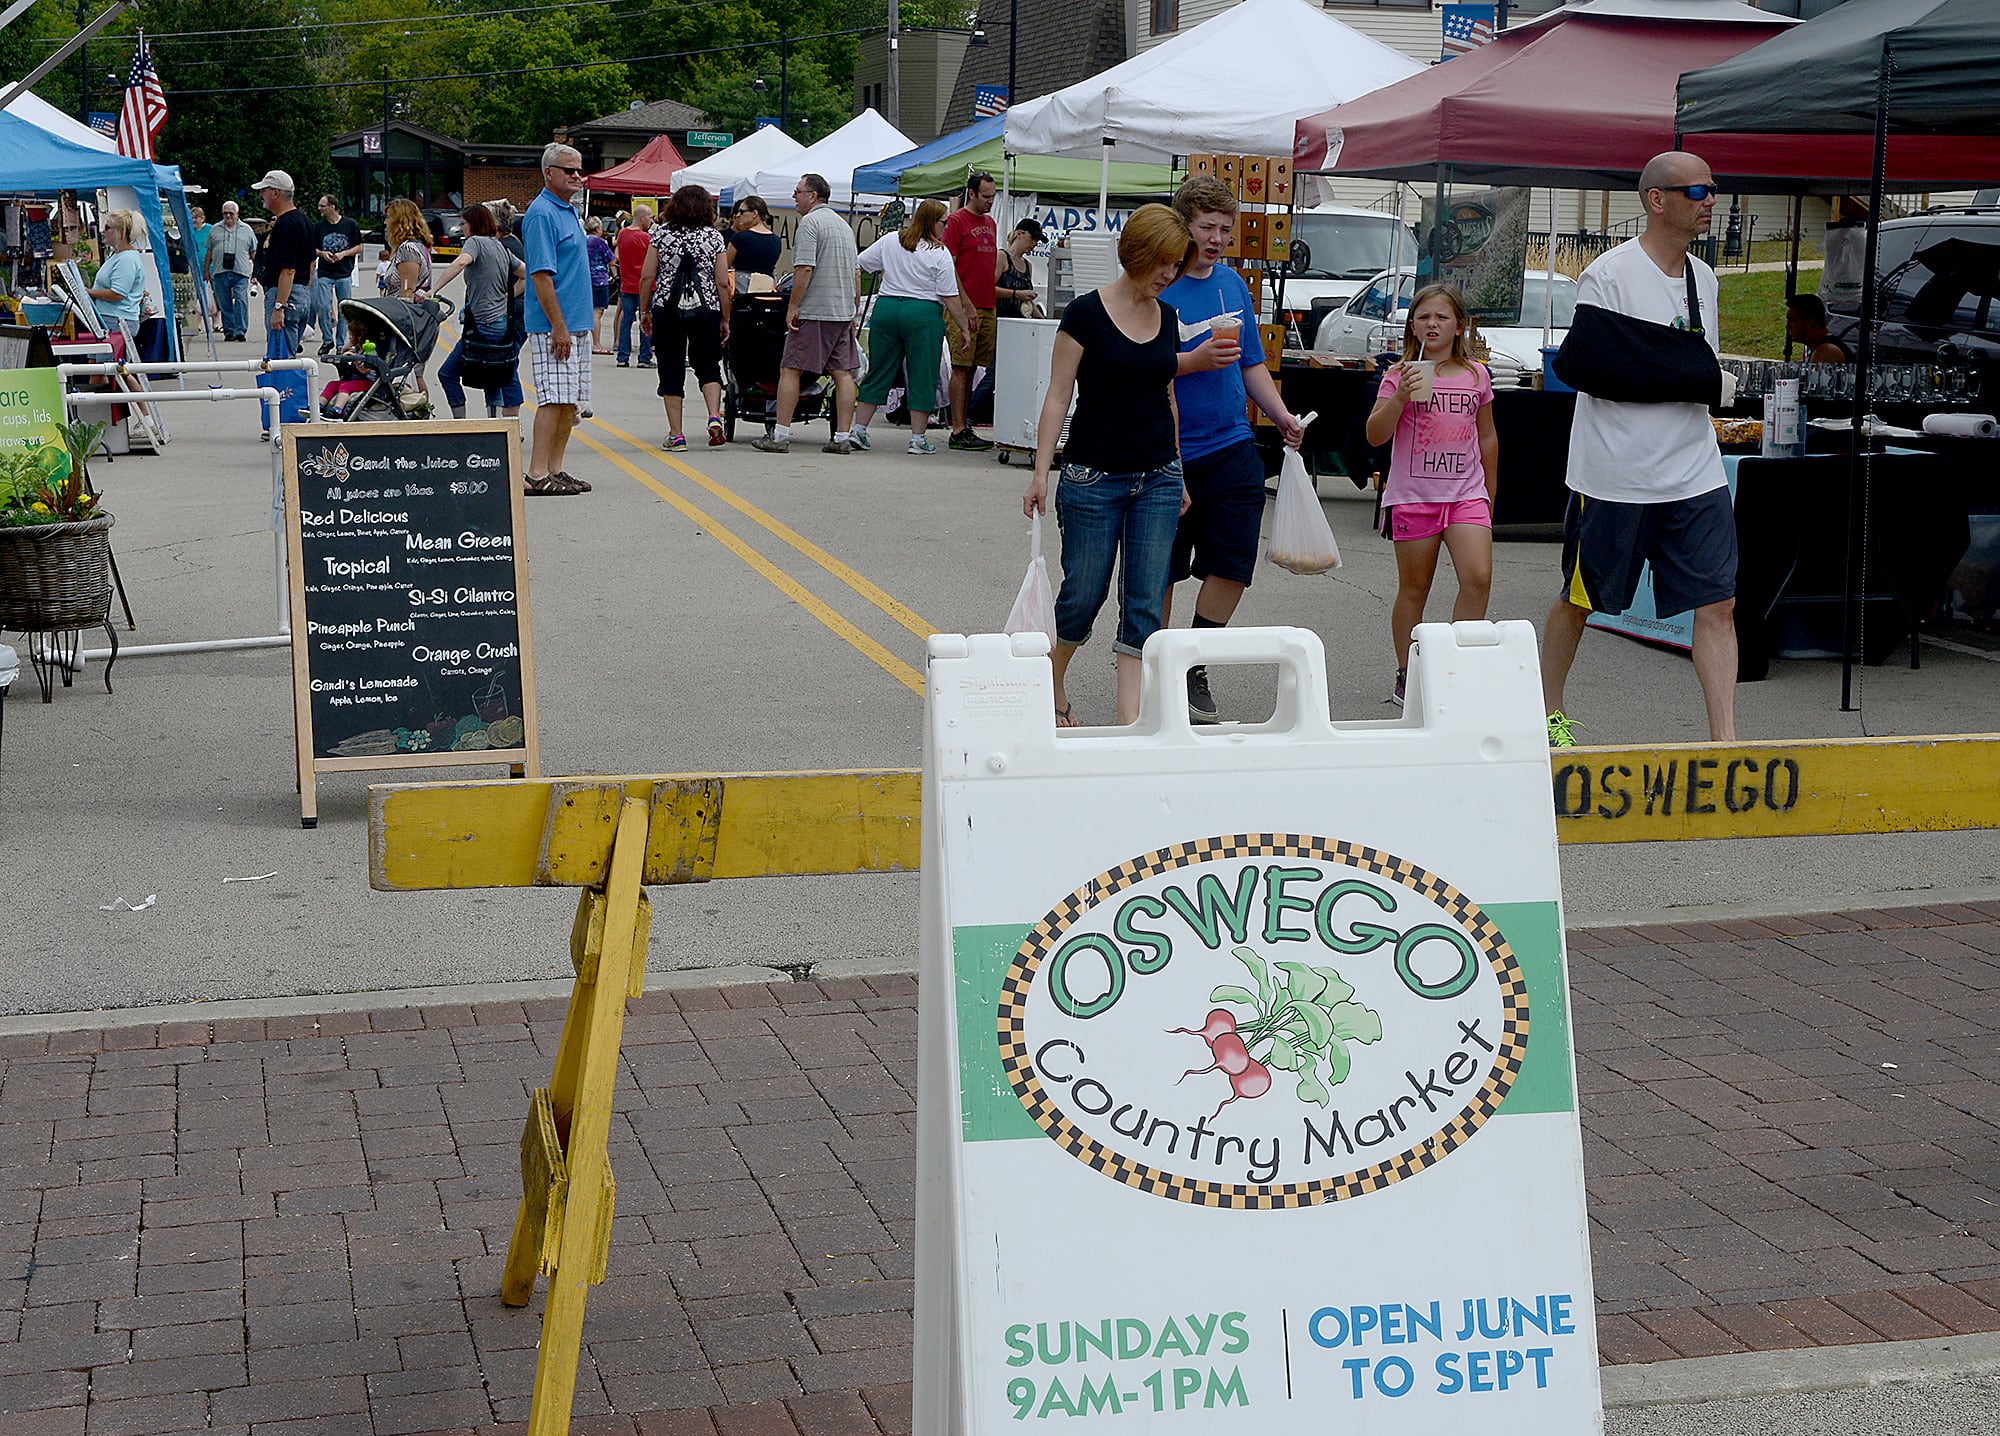 5 Things to Do: Country Market in Oswego